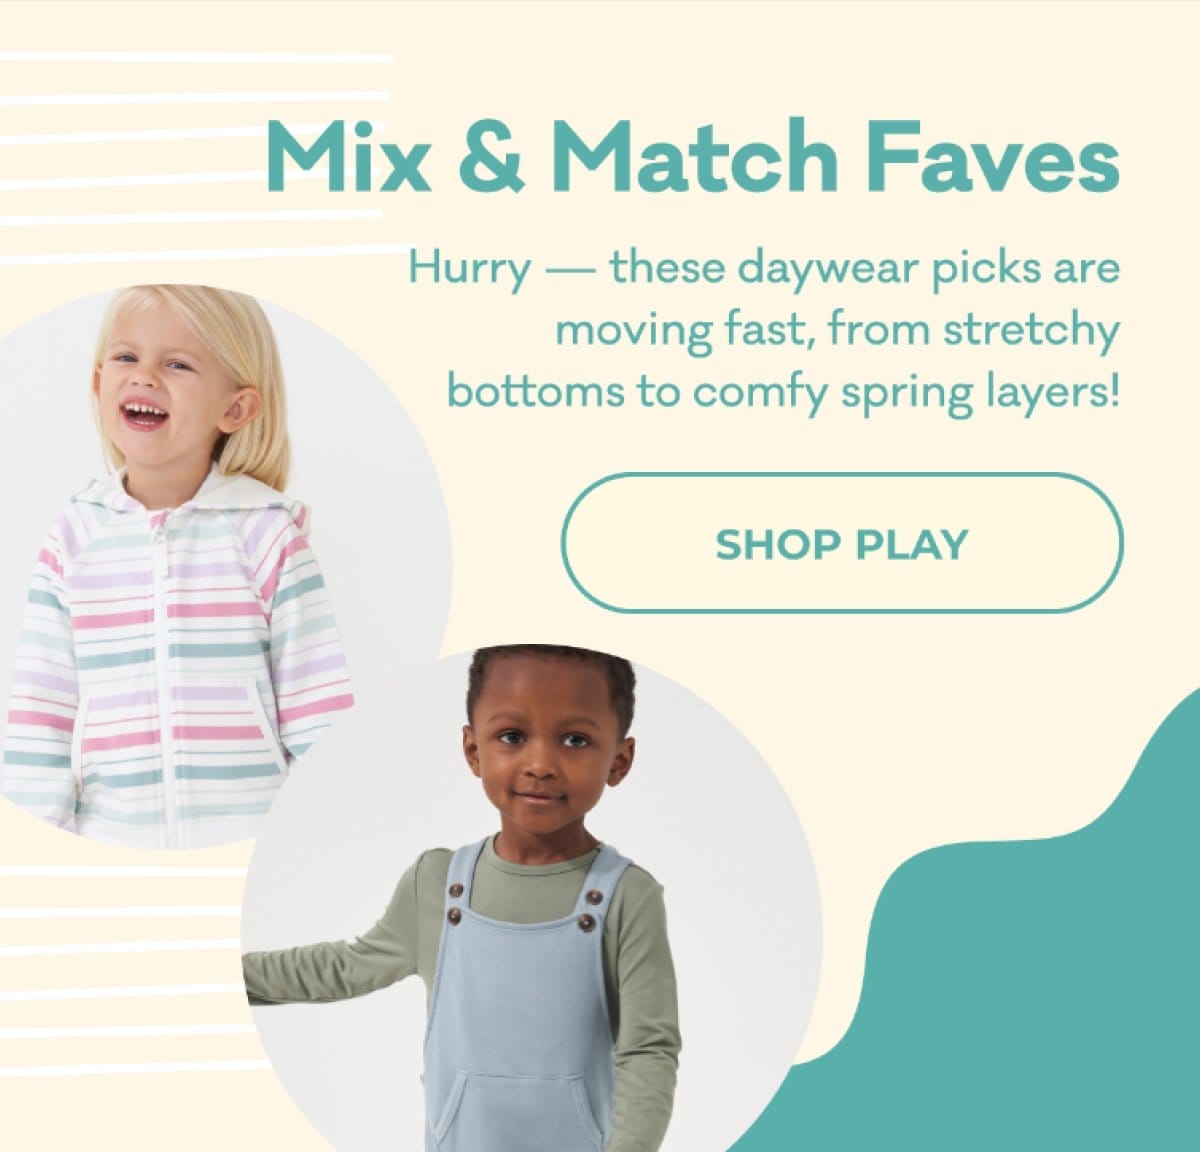 Mix & Match Faves | Hurry — these daywear picks are moving fast, from stretchy bottoms to comfy spring layers! | SHOP PLAY